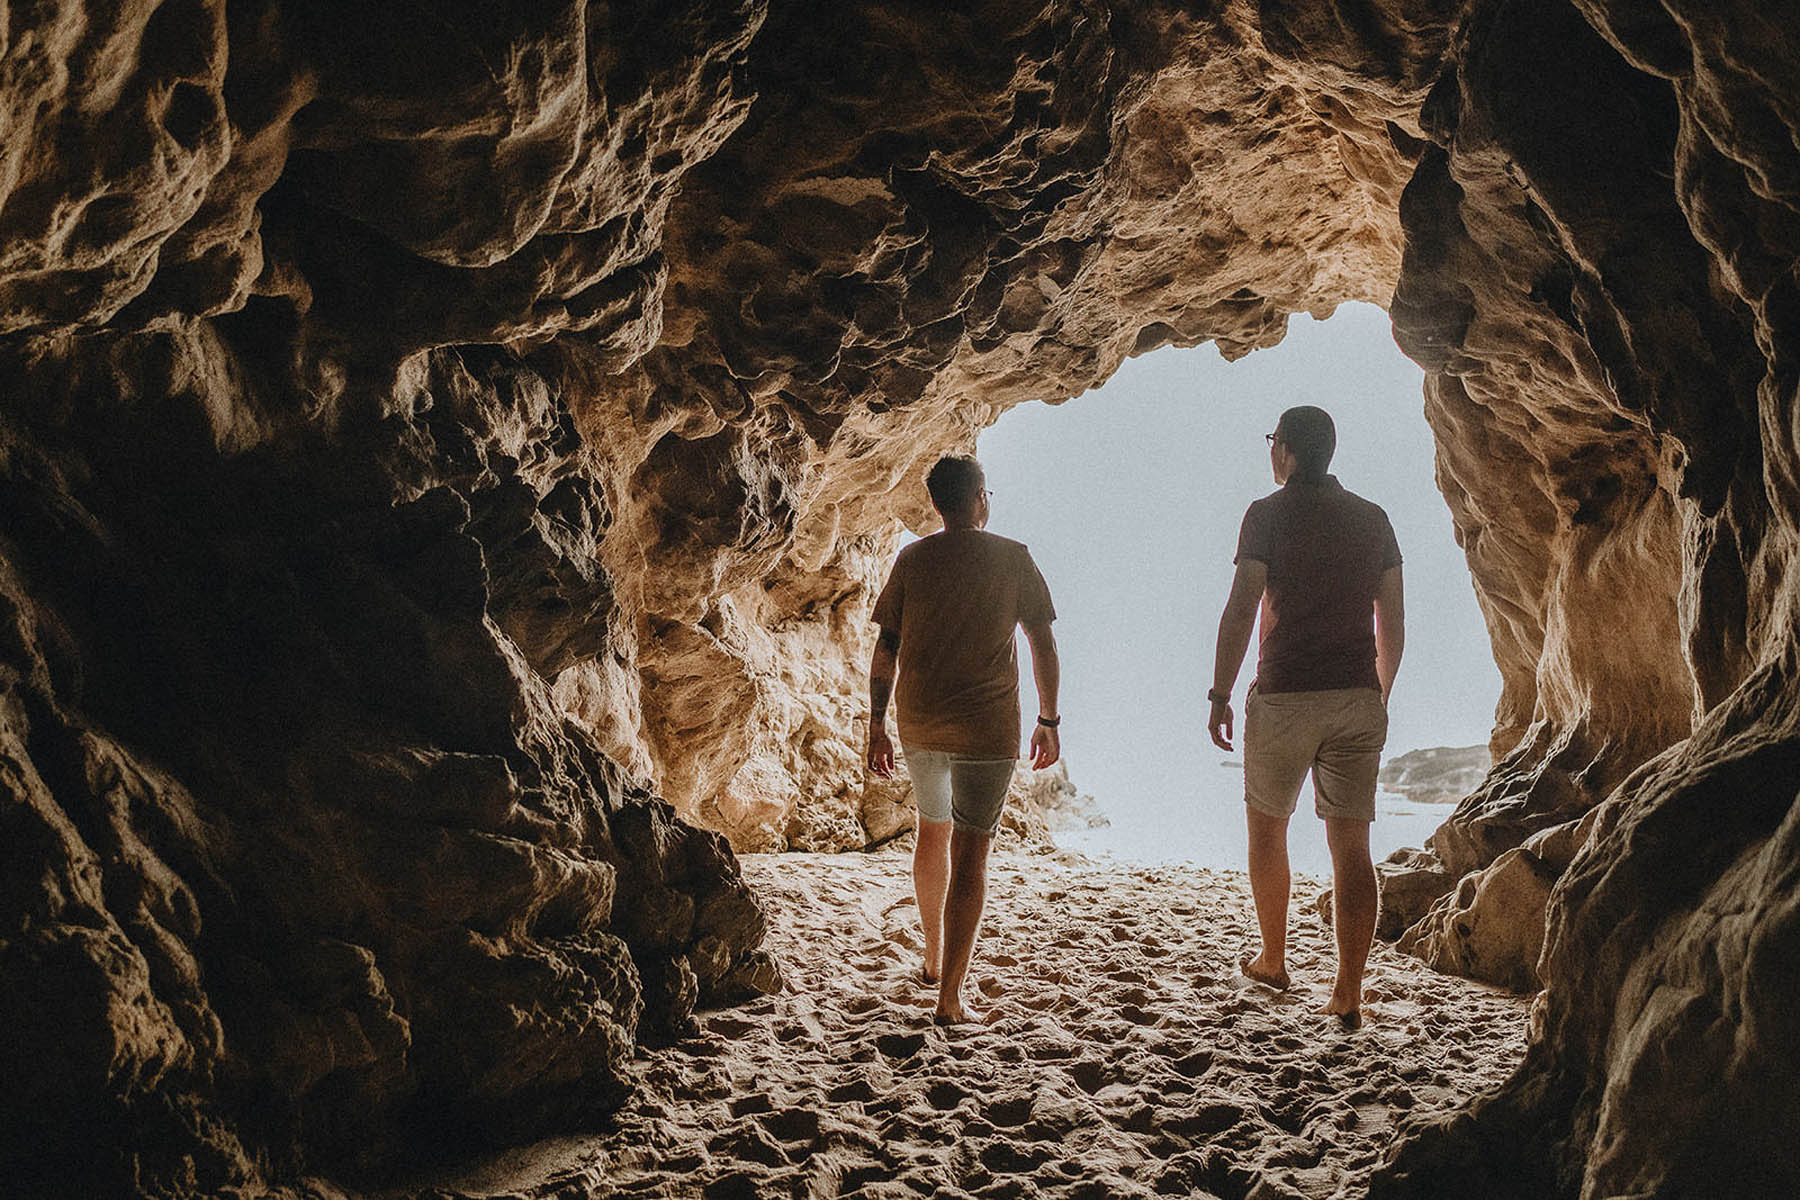 Two people walk through a cavernous rock cave looking out on an ocean.